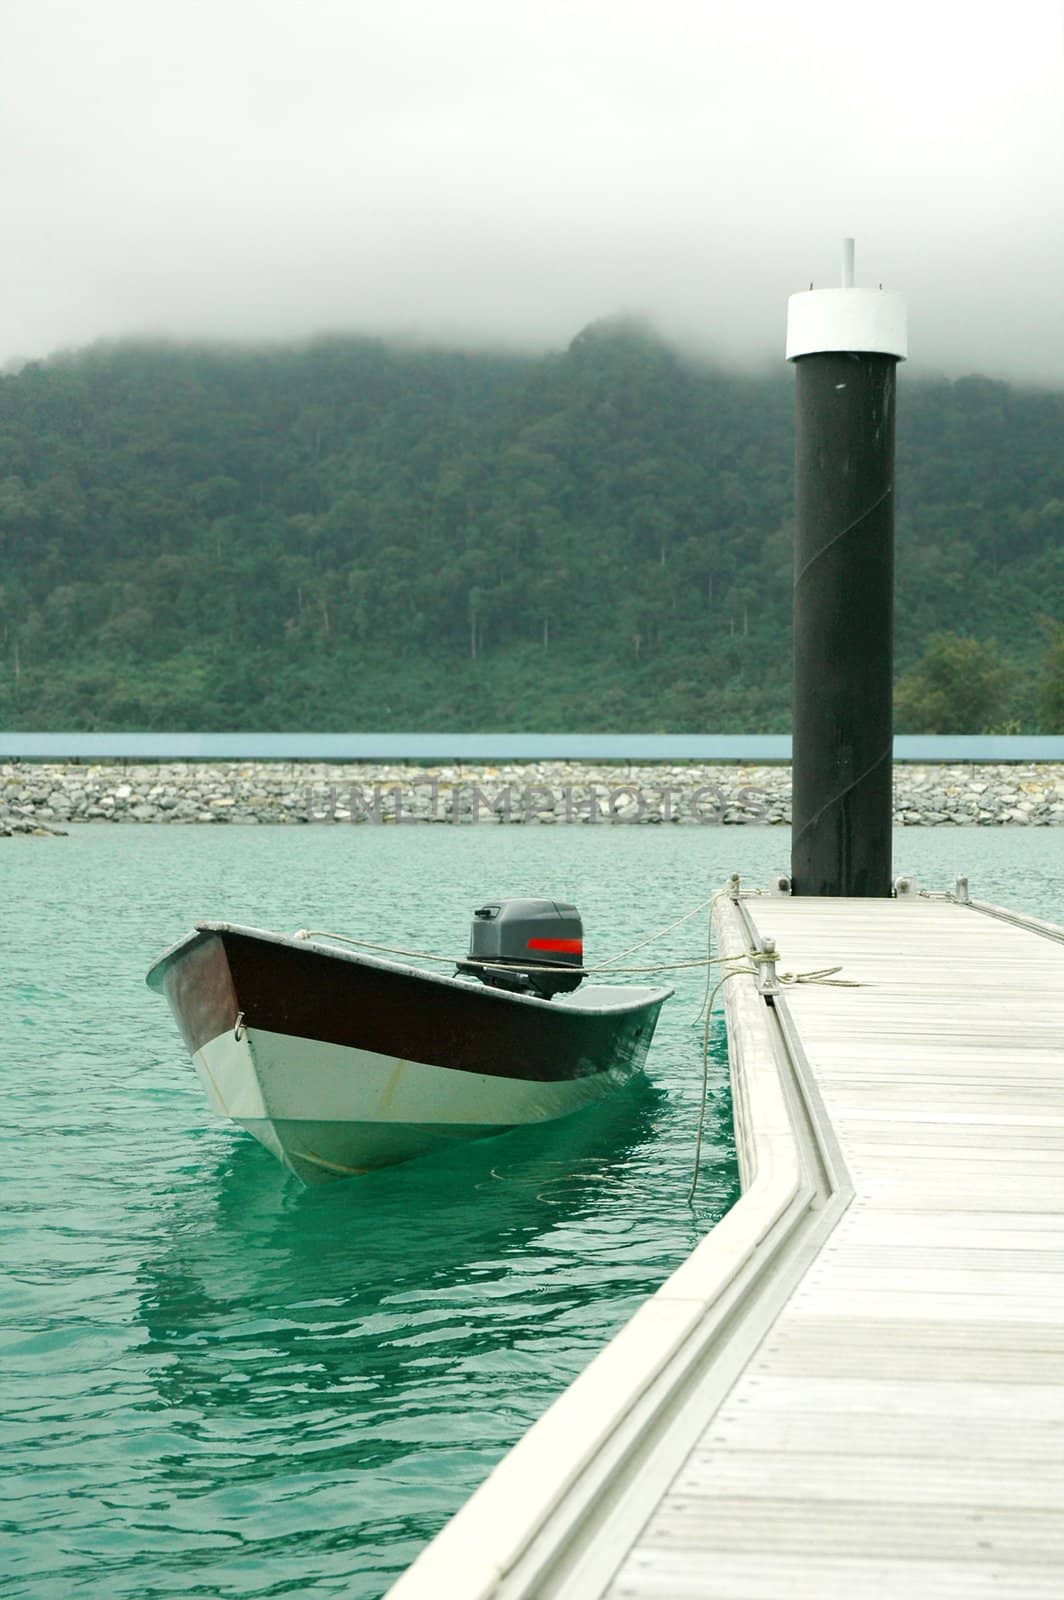 Boat at a wooden plank jetty against misty mountain backdrop